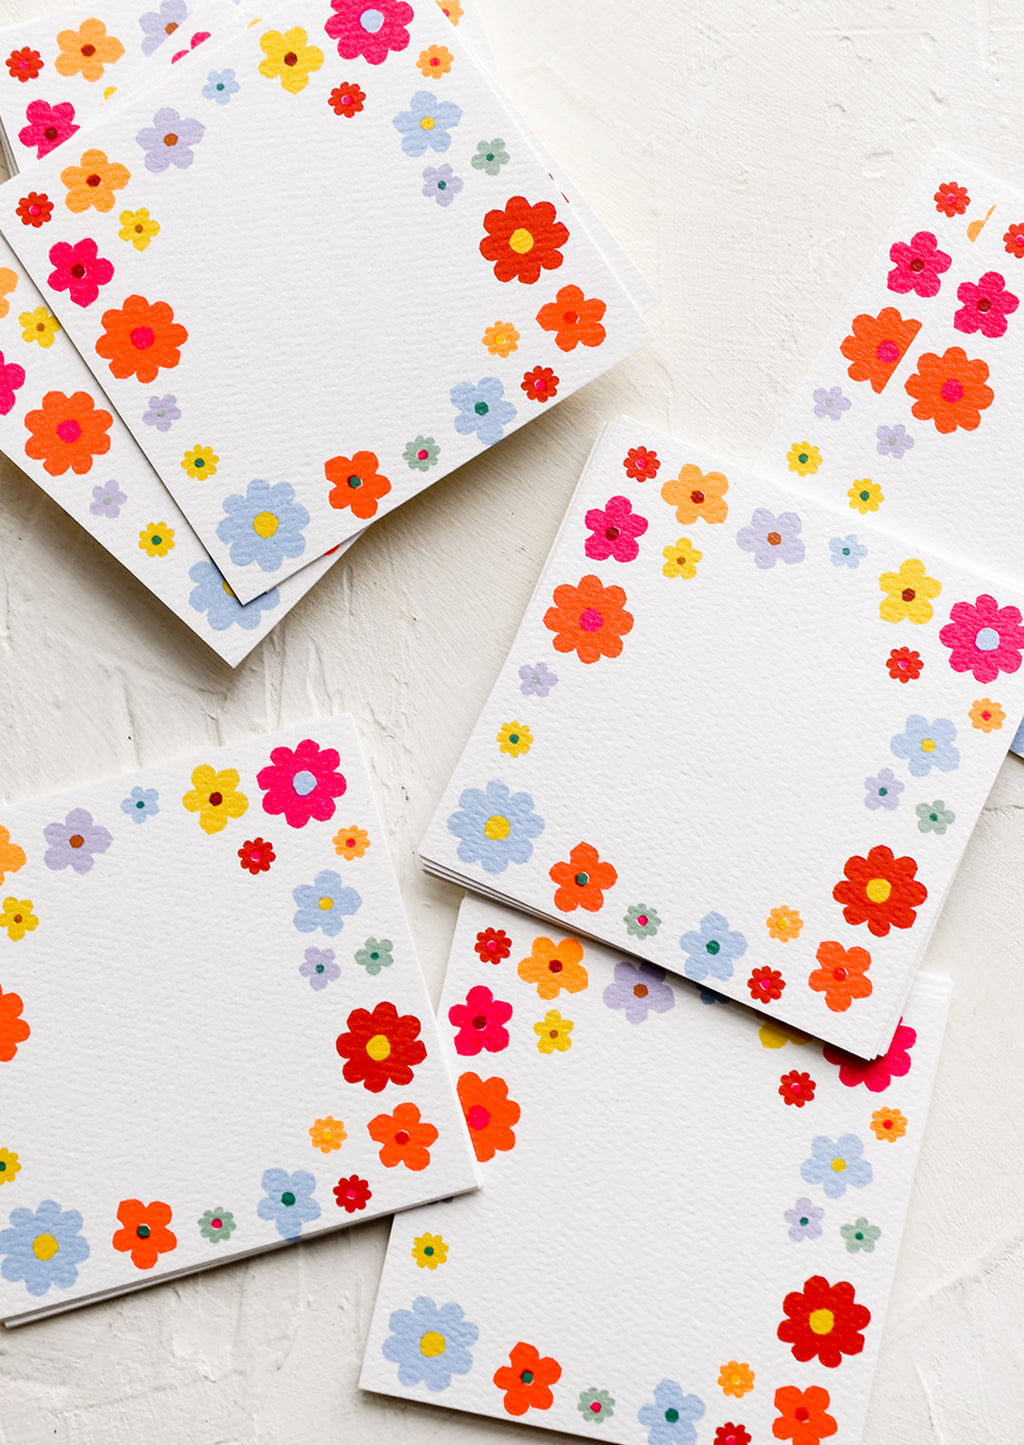 1: Mini square notecards with floral border.